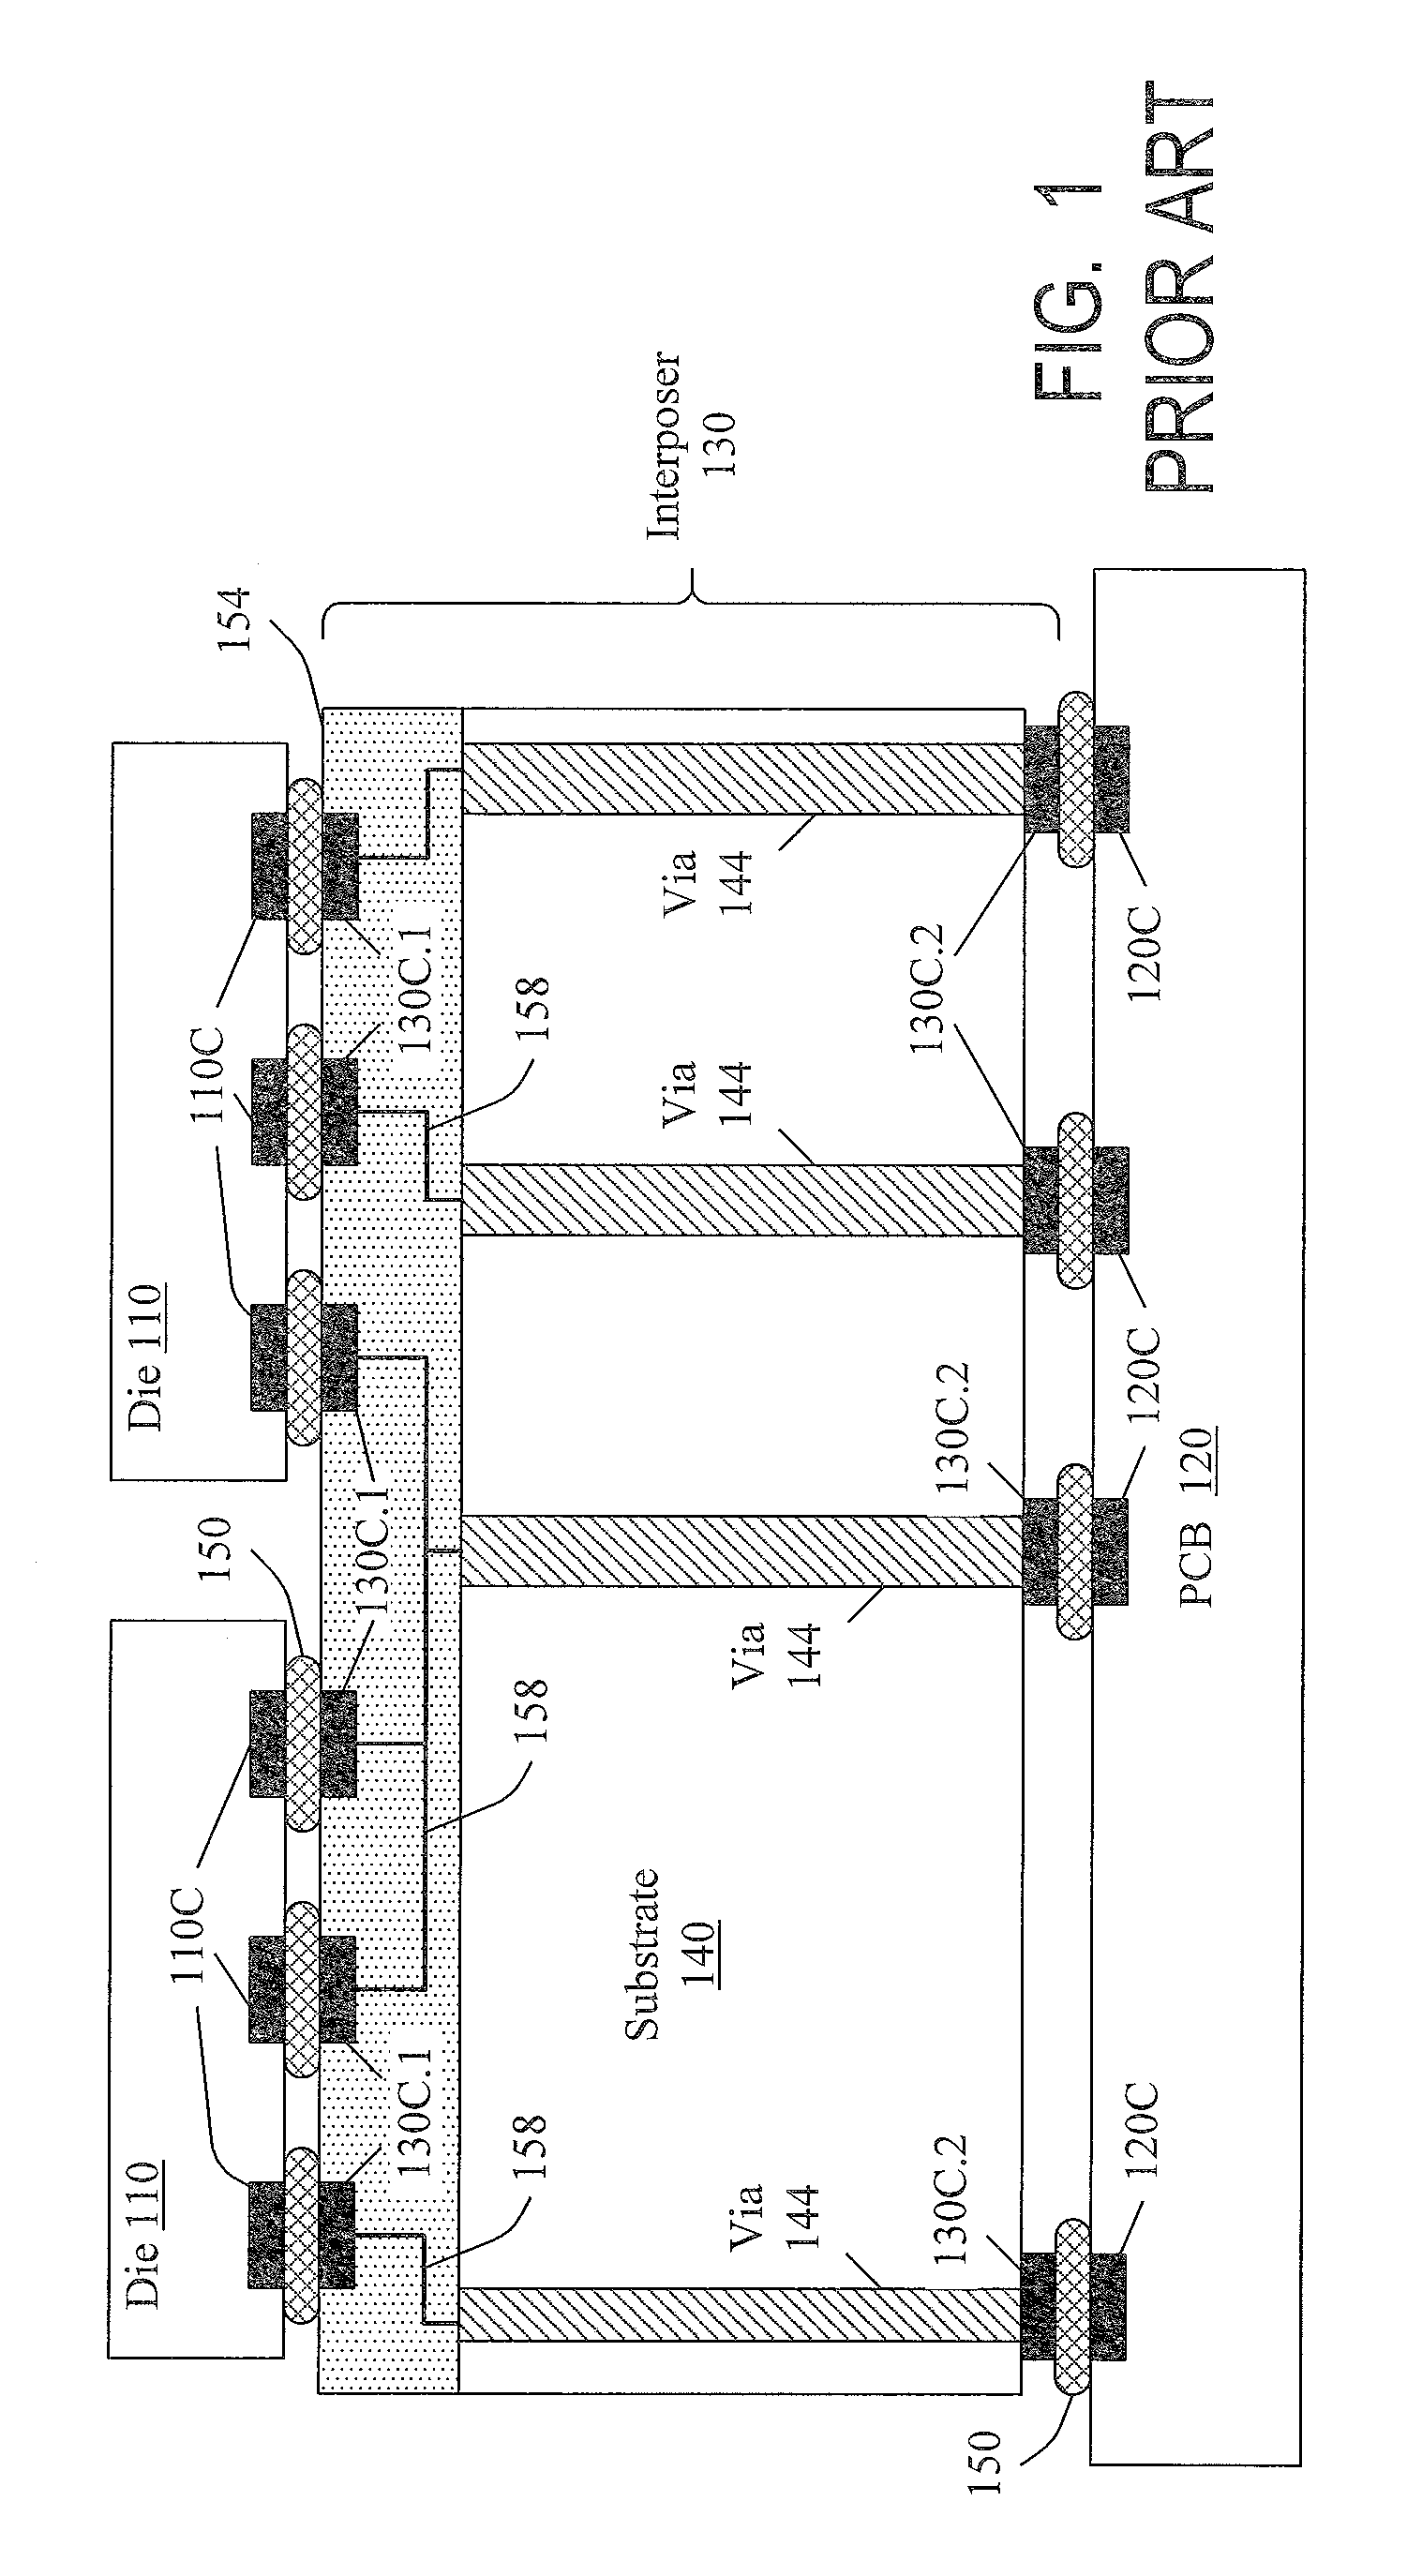 Substrates with through vias with conductive features for connection to integrated circuit elements, and methods for forming through vias in substrates